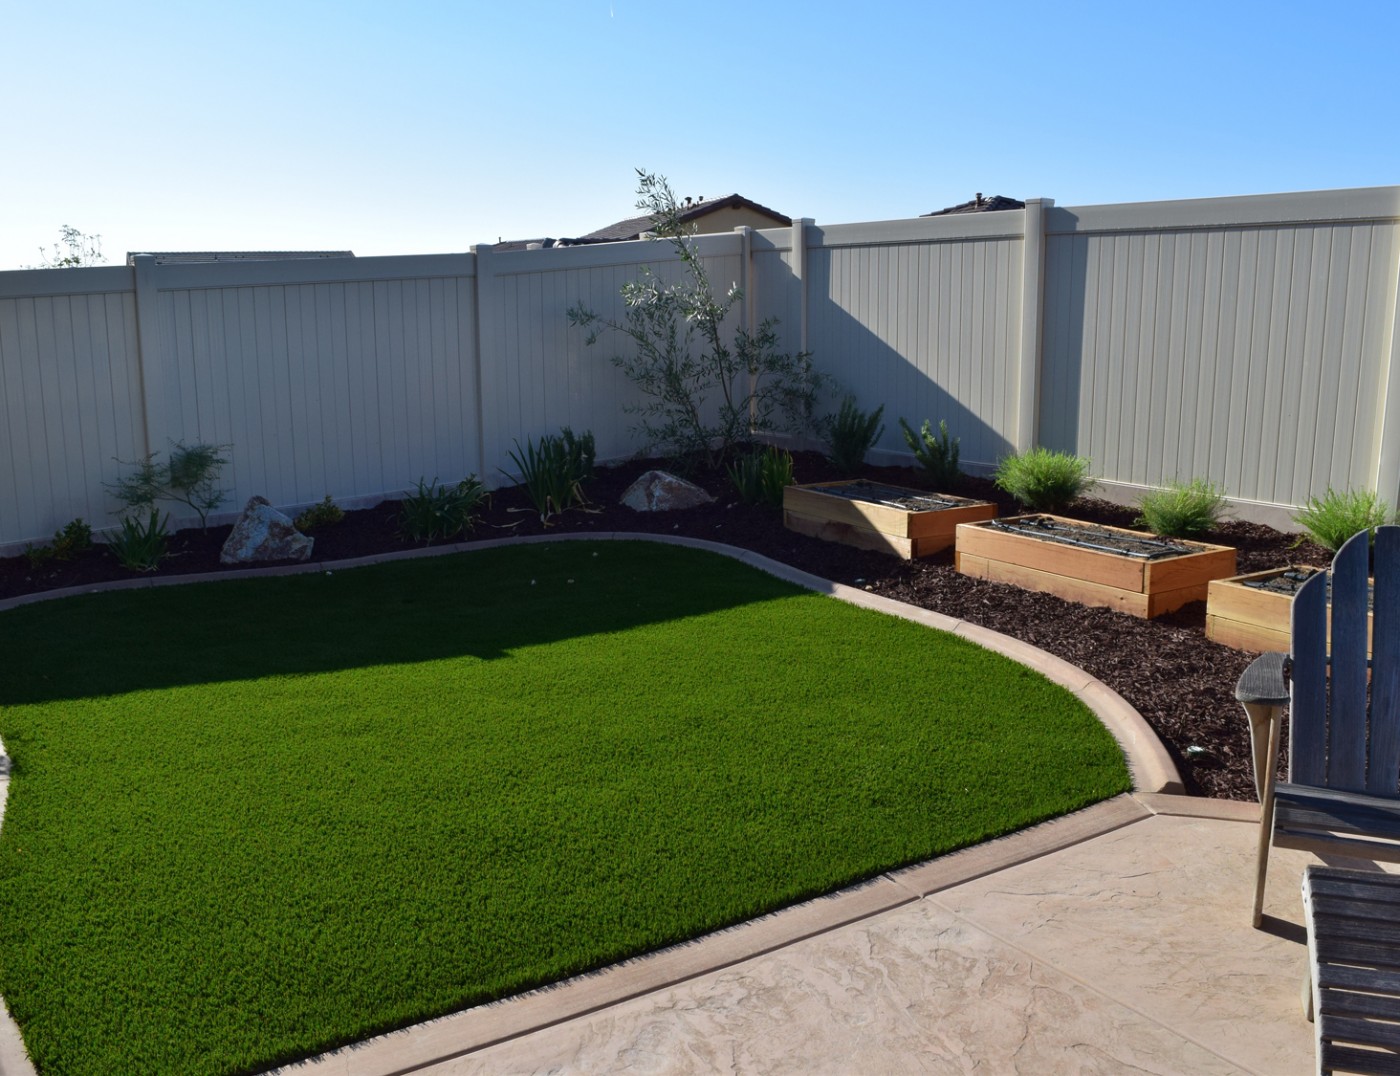 Artificial turf and garden boxes in Temecula McCabe's Landscape Construction